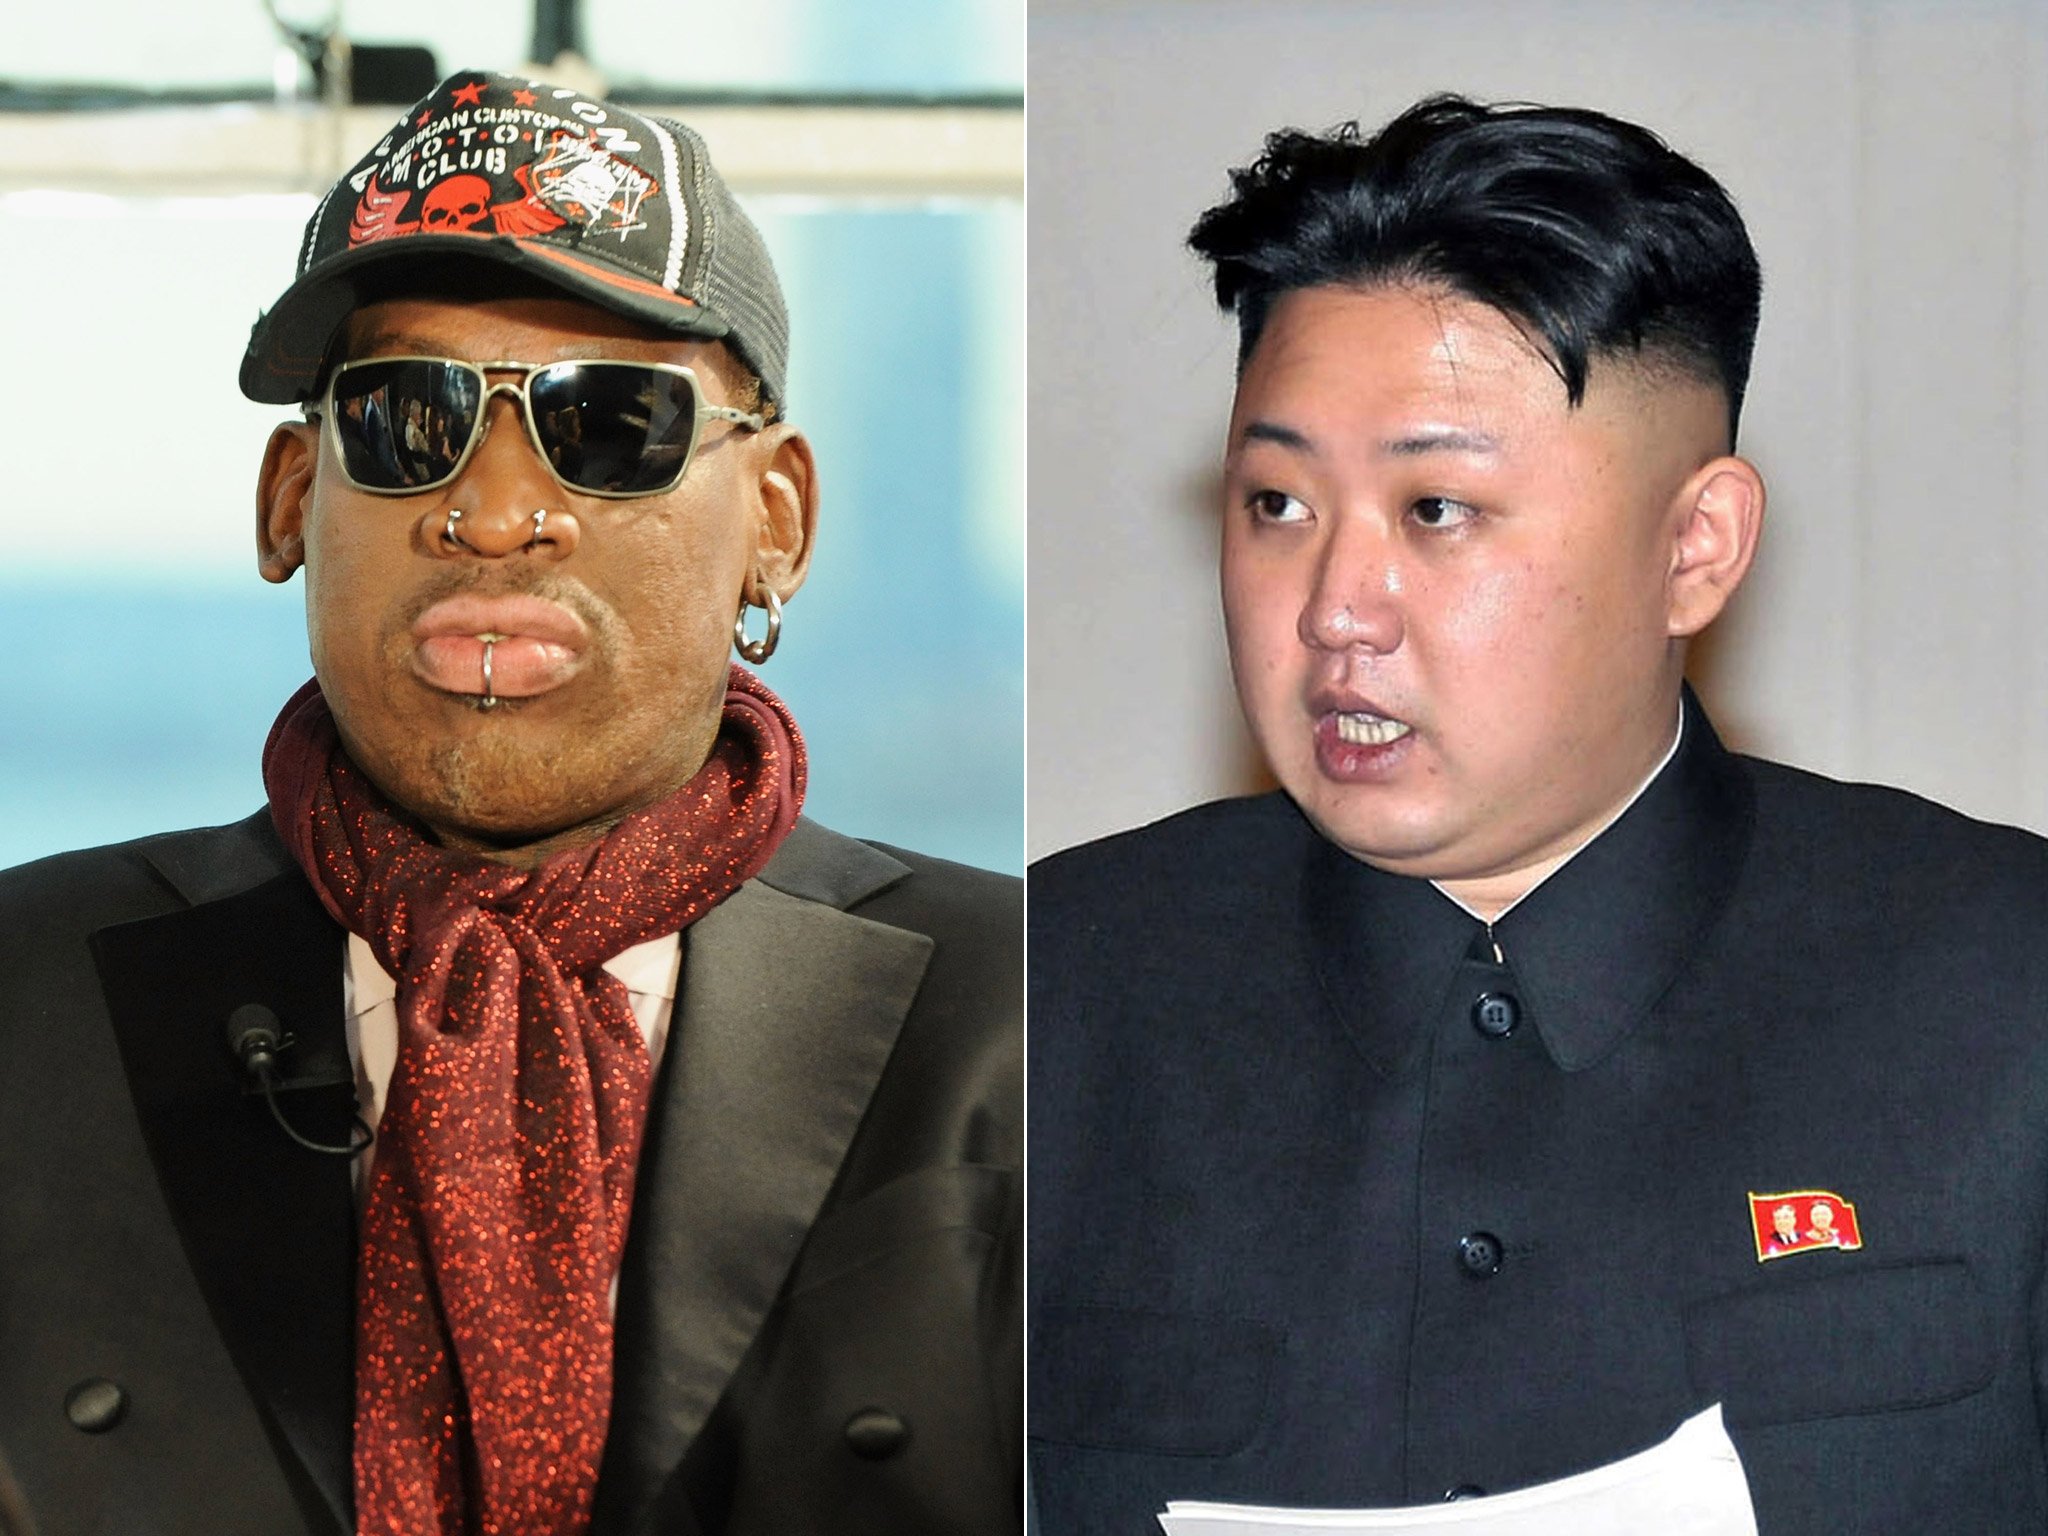 Dennis Rodman is visiting North Korea for the second time this year to meet leader Kim Jong-un